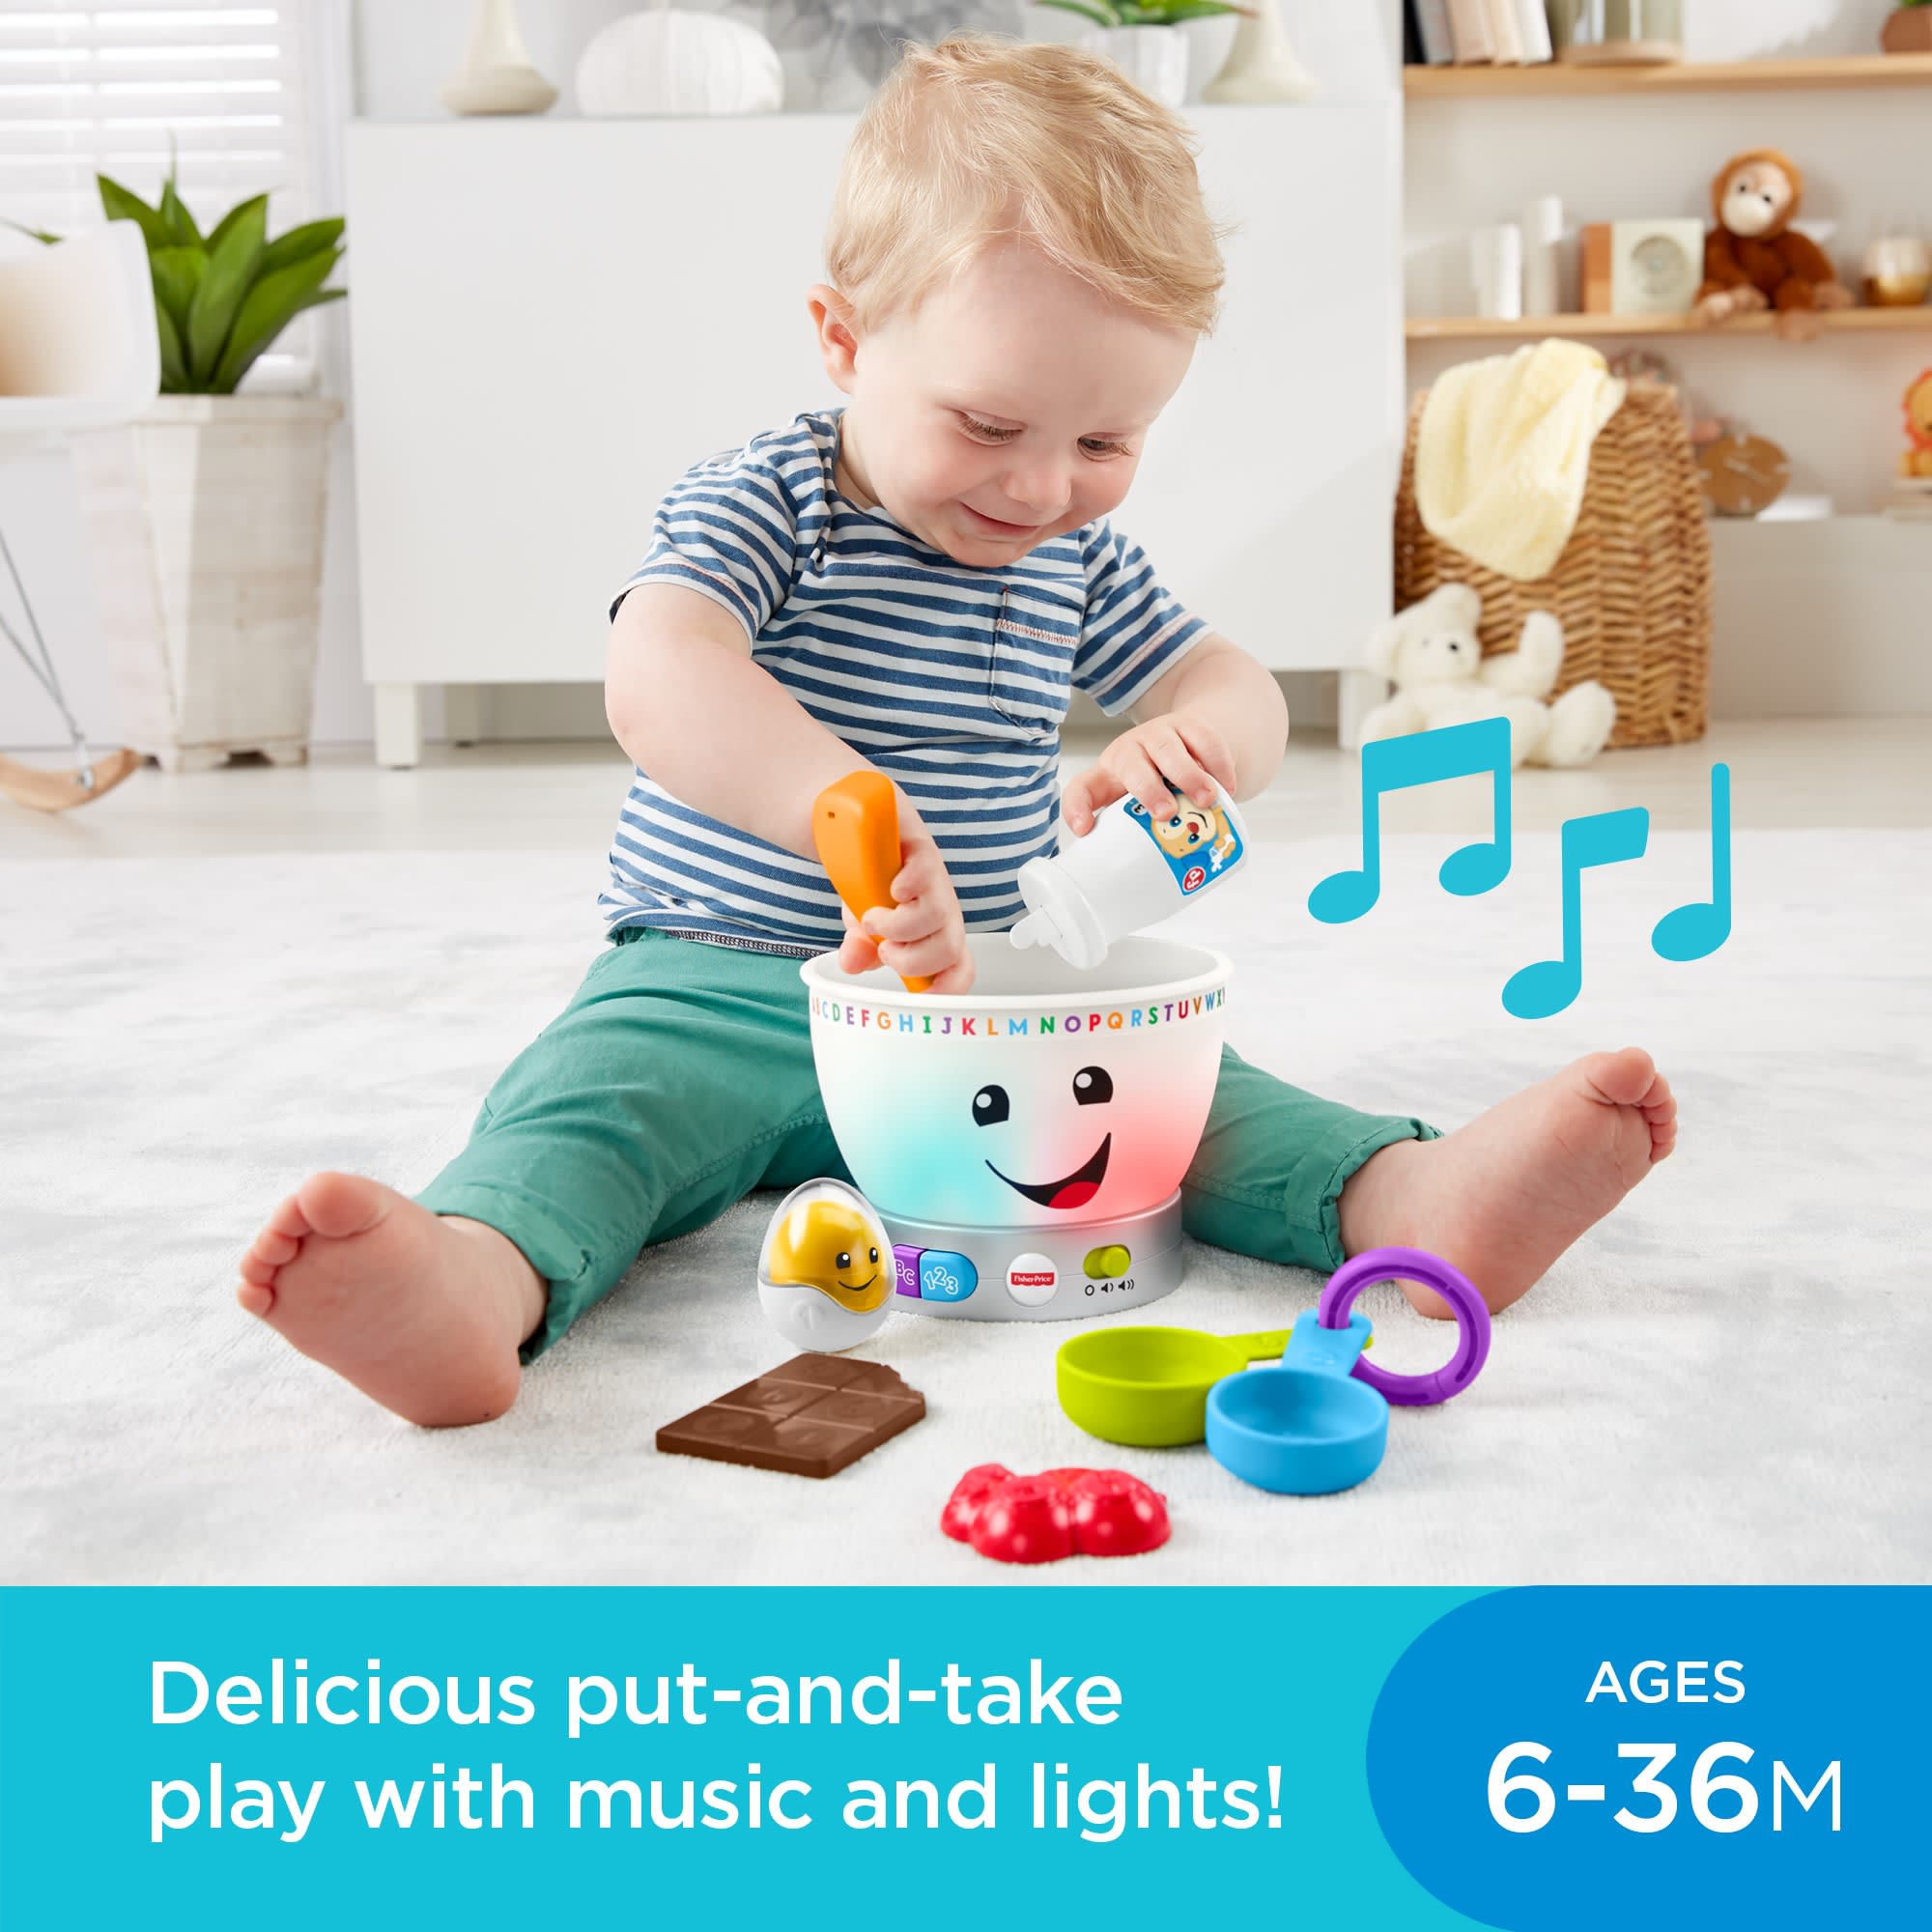 Fisher-Price Laugh & Learn Wake Up & Learn Coffee Mug Baby & Toddler Toy  with Music & Lights 